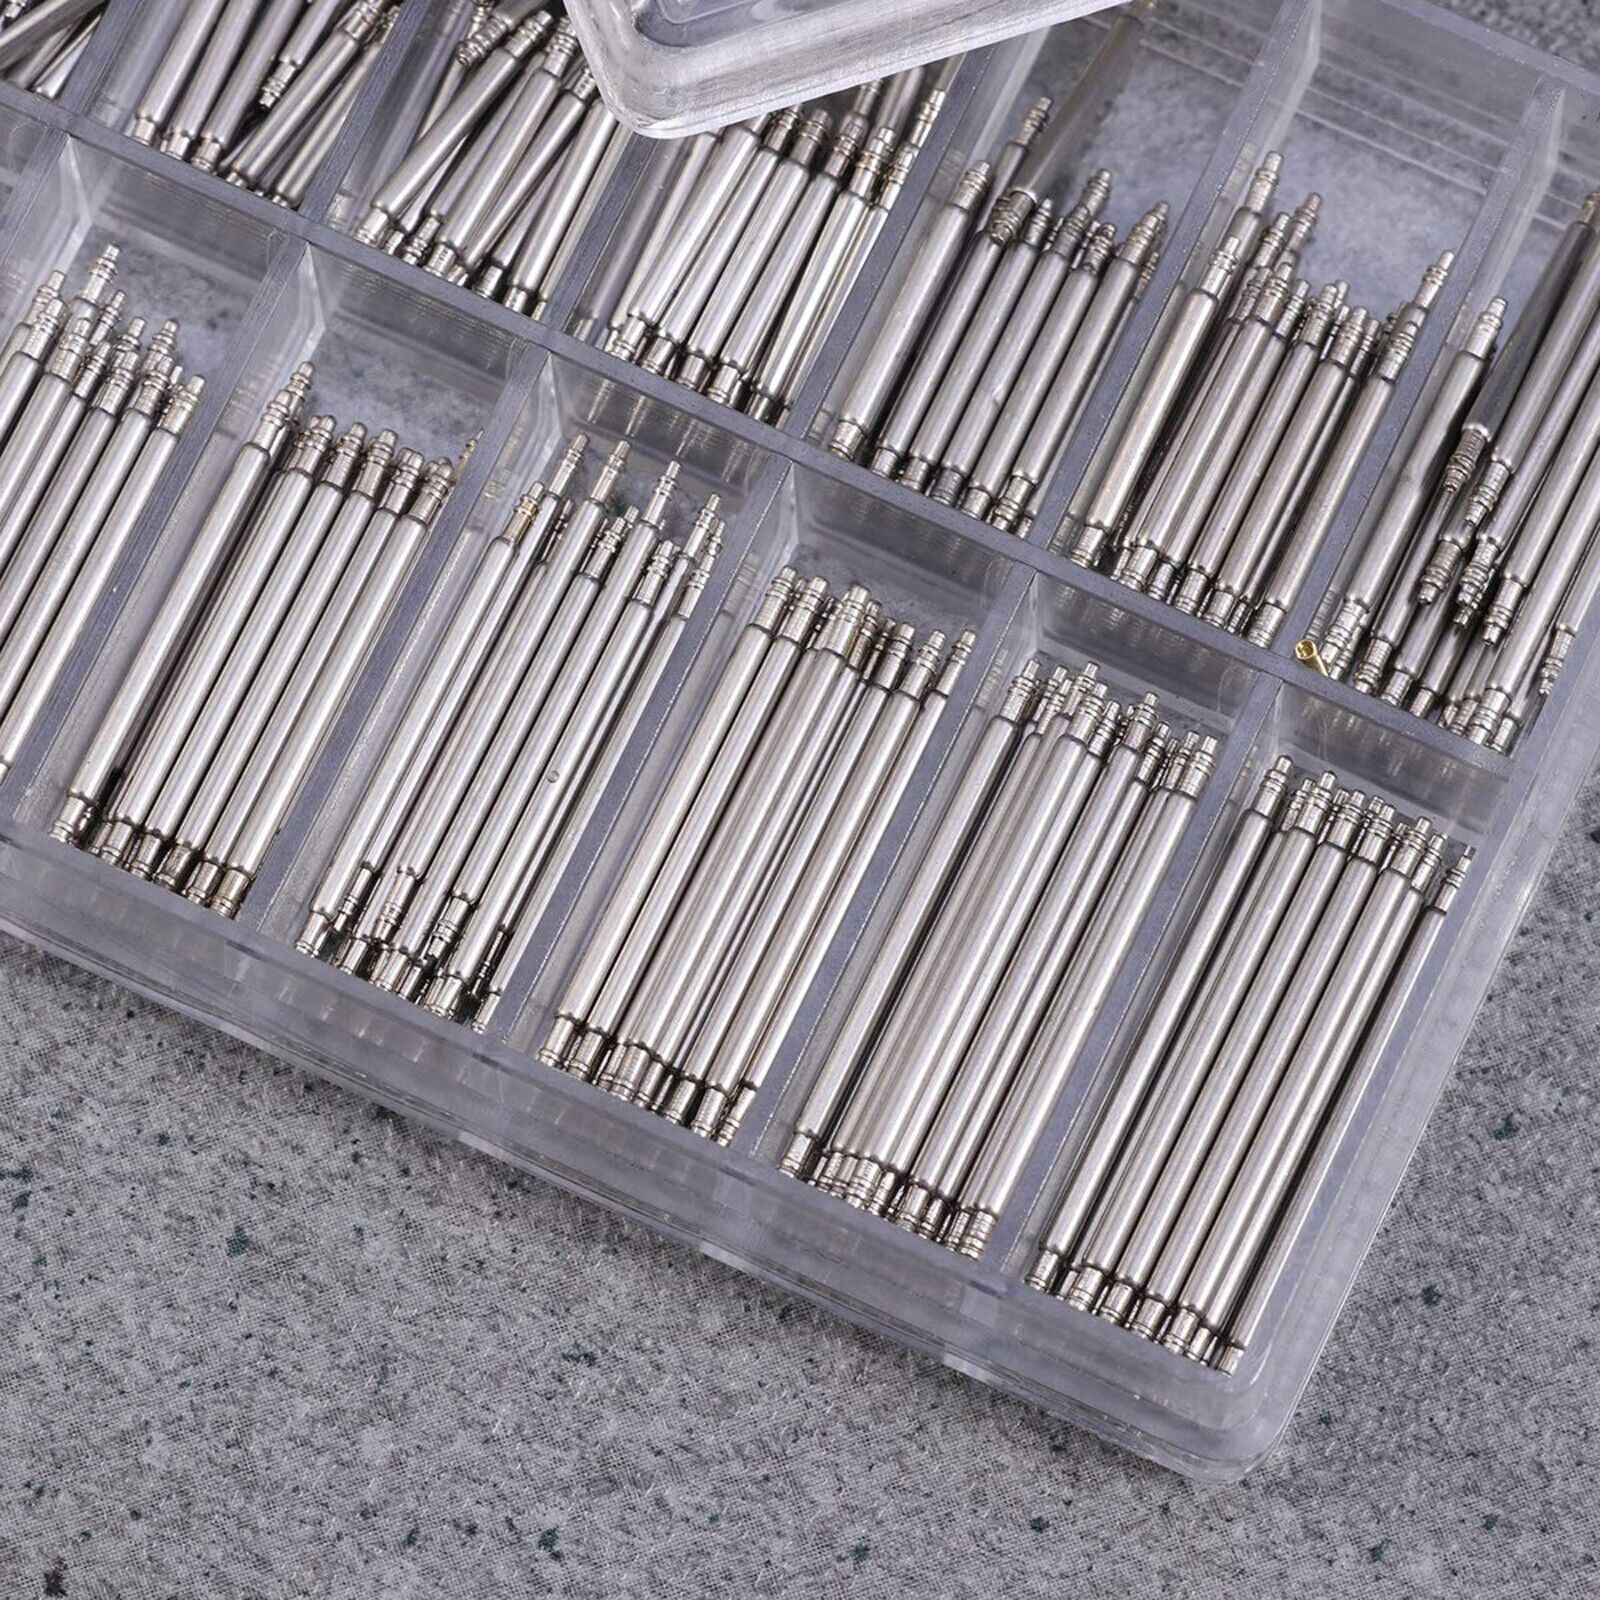 360pcs Watch PINS SPRING BARS Band Strap Link 8-25mm Repair Kit Stainless Steel 